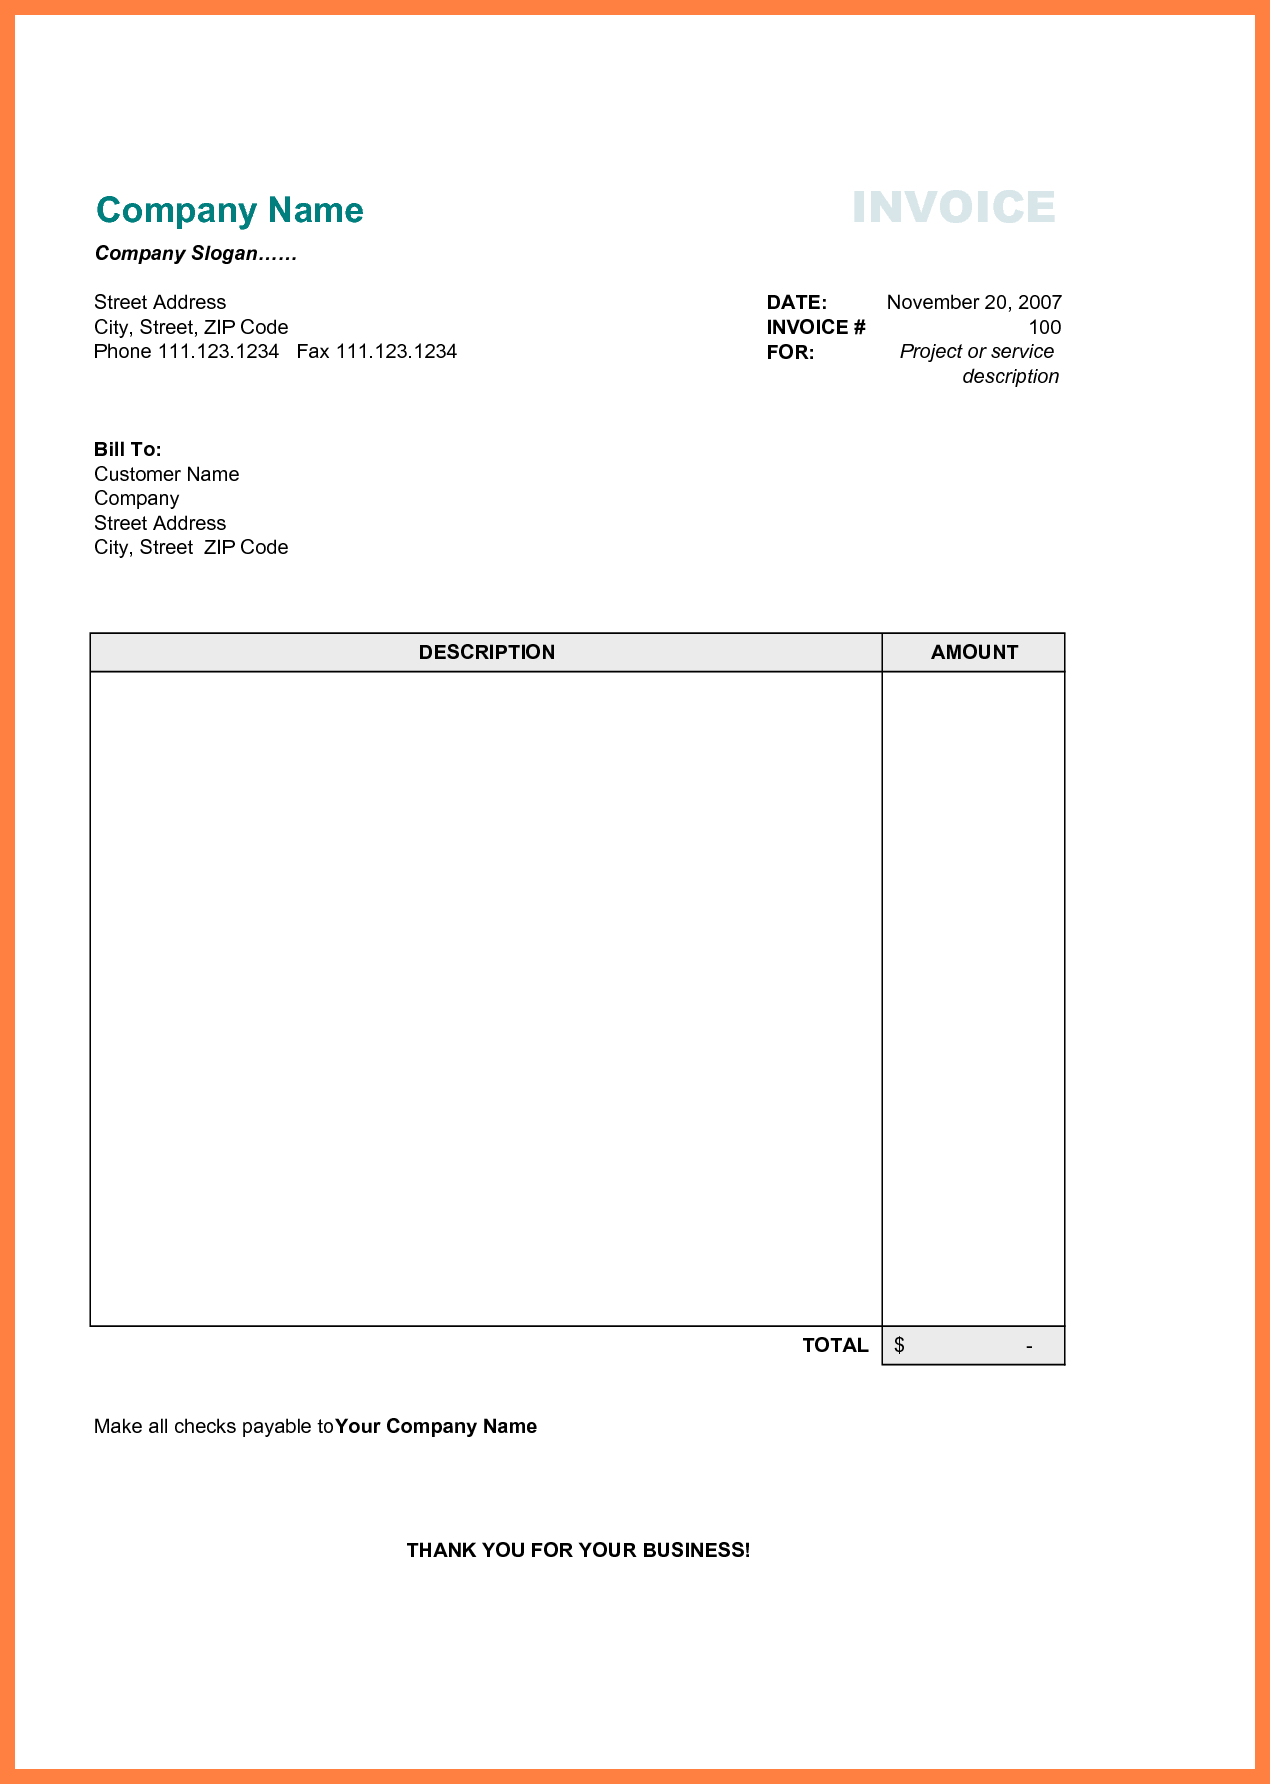 Free Printable Business Invoice Template - Invoice Format In Excel - Free Printable Blank Invoice Sheet